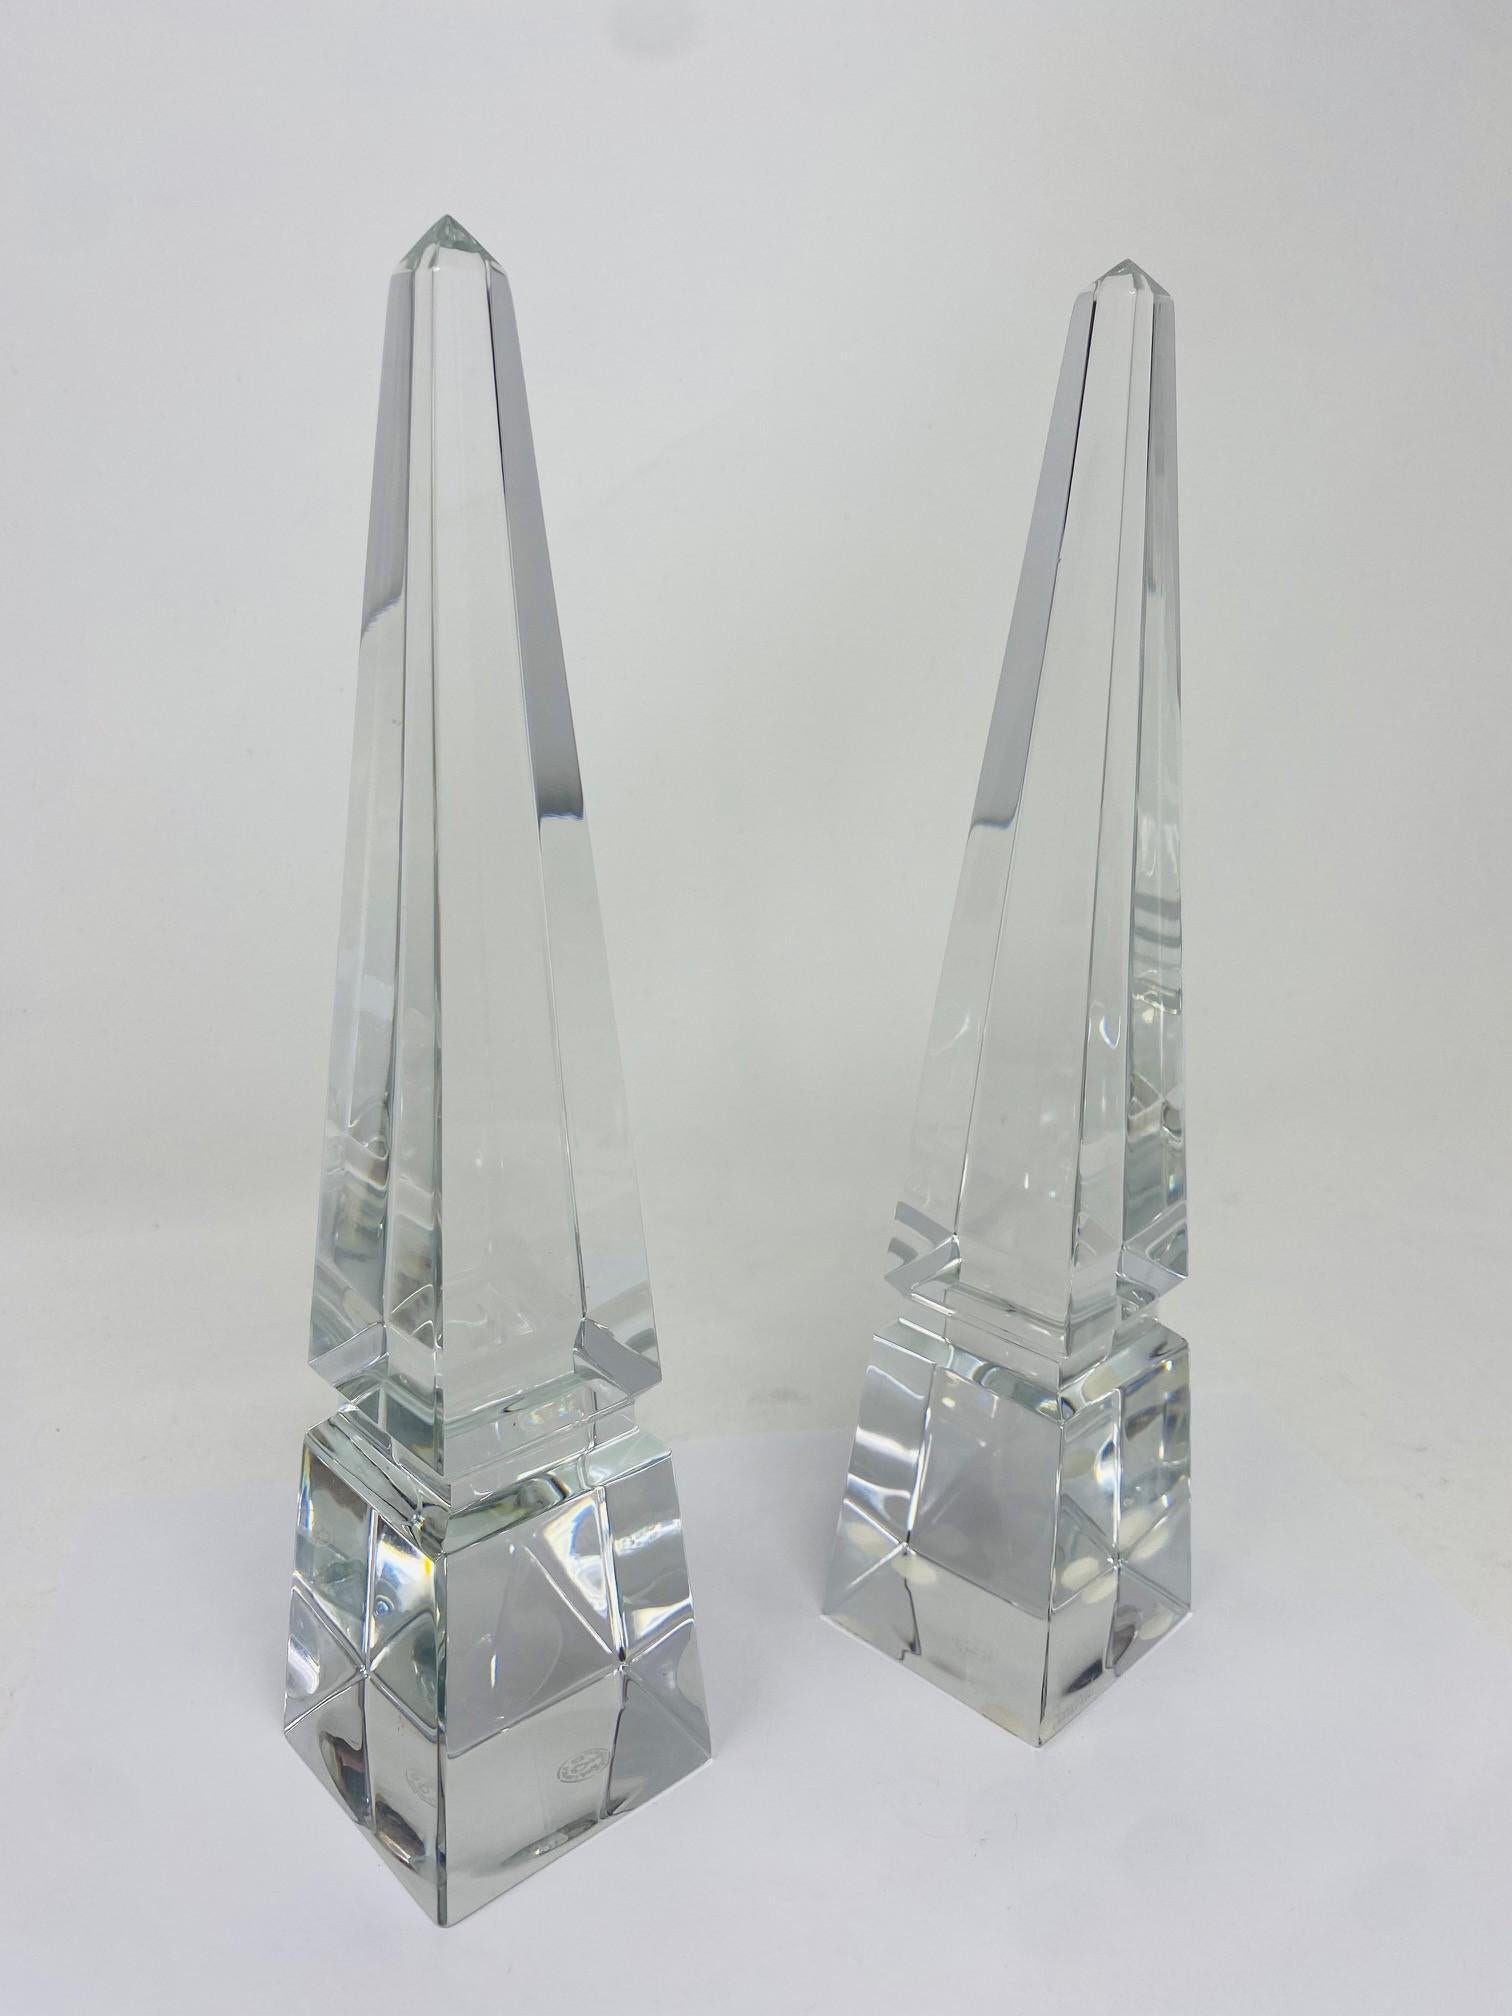 
Incredible and stunning Baccarat Louxor crystal obelisks in near mint condition. Great pieces as a gift or to complement with any art glass collection. The pair exhibits the Baccarat stamp and seal on the bottom for authenticity.  The sculptural